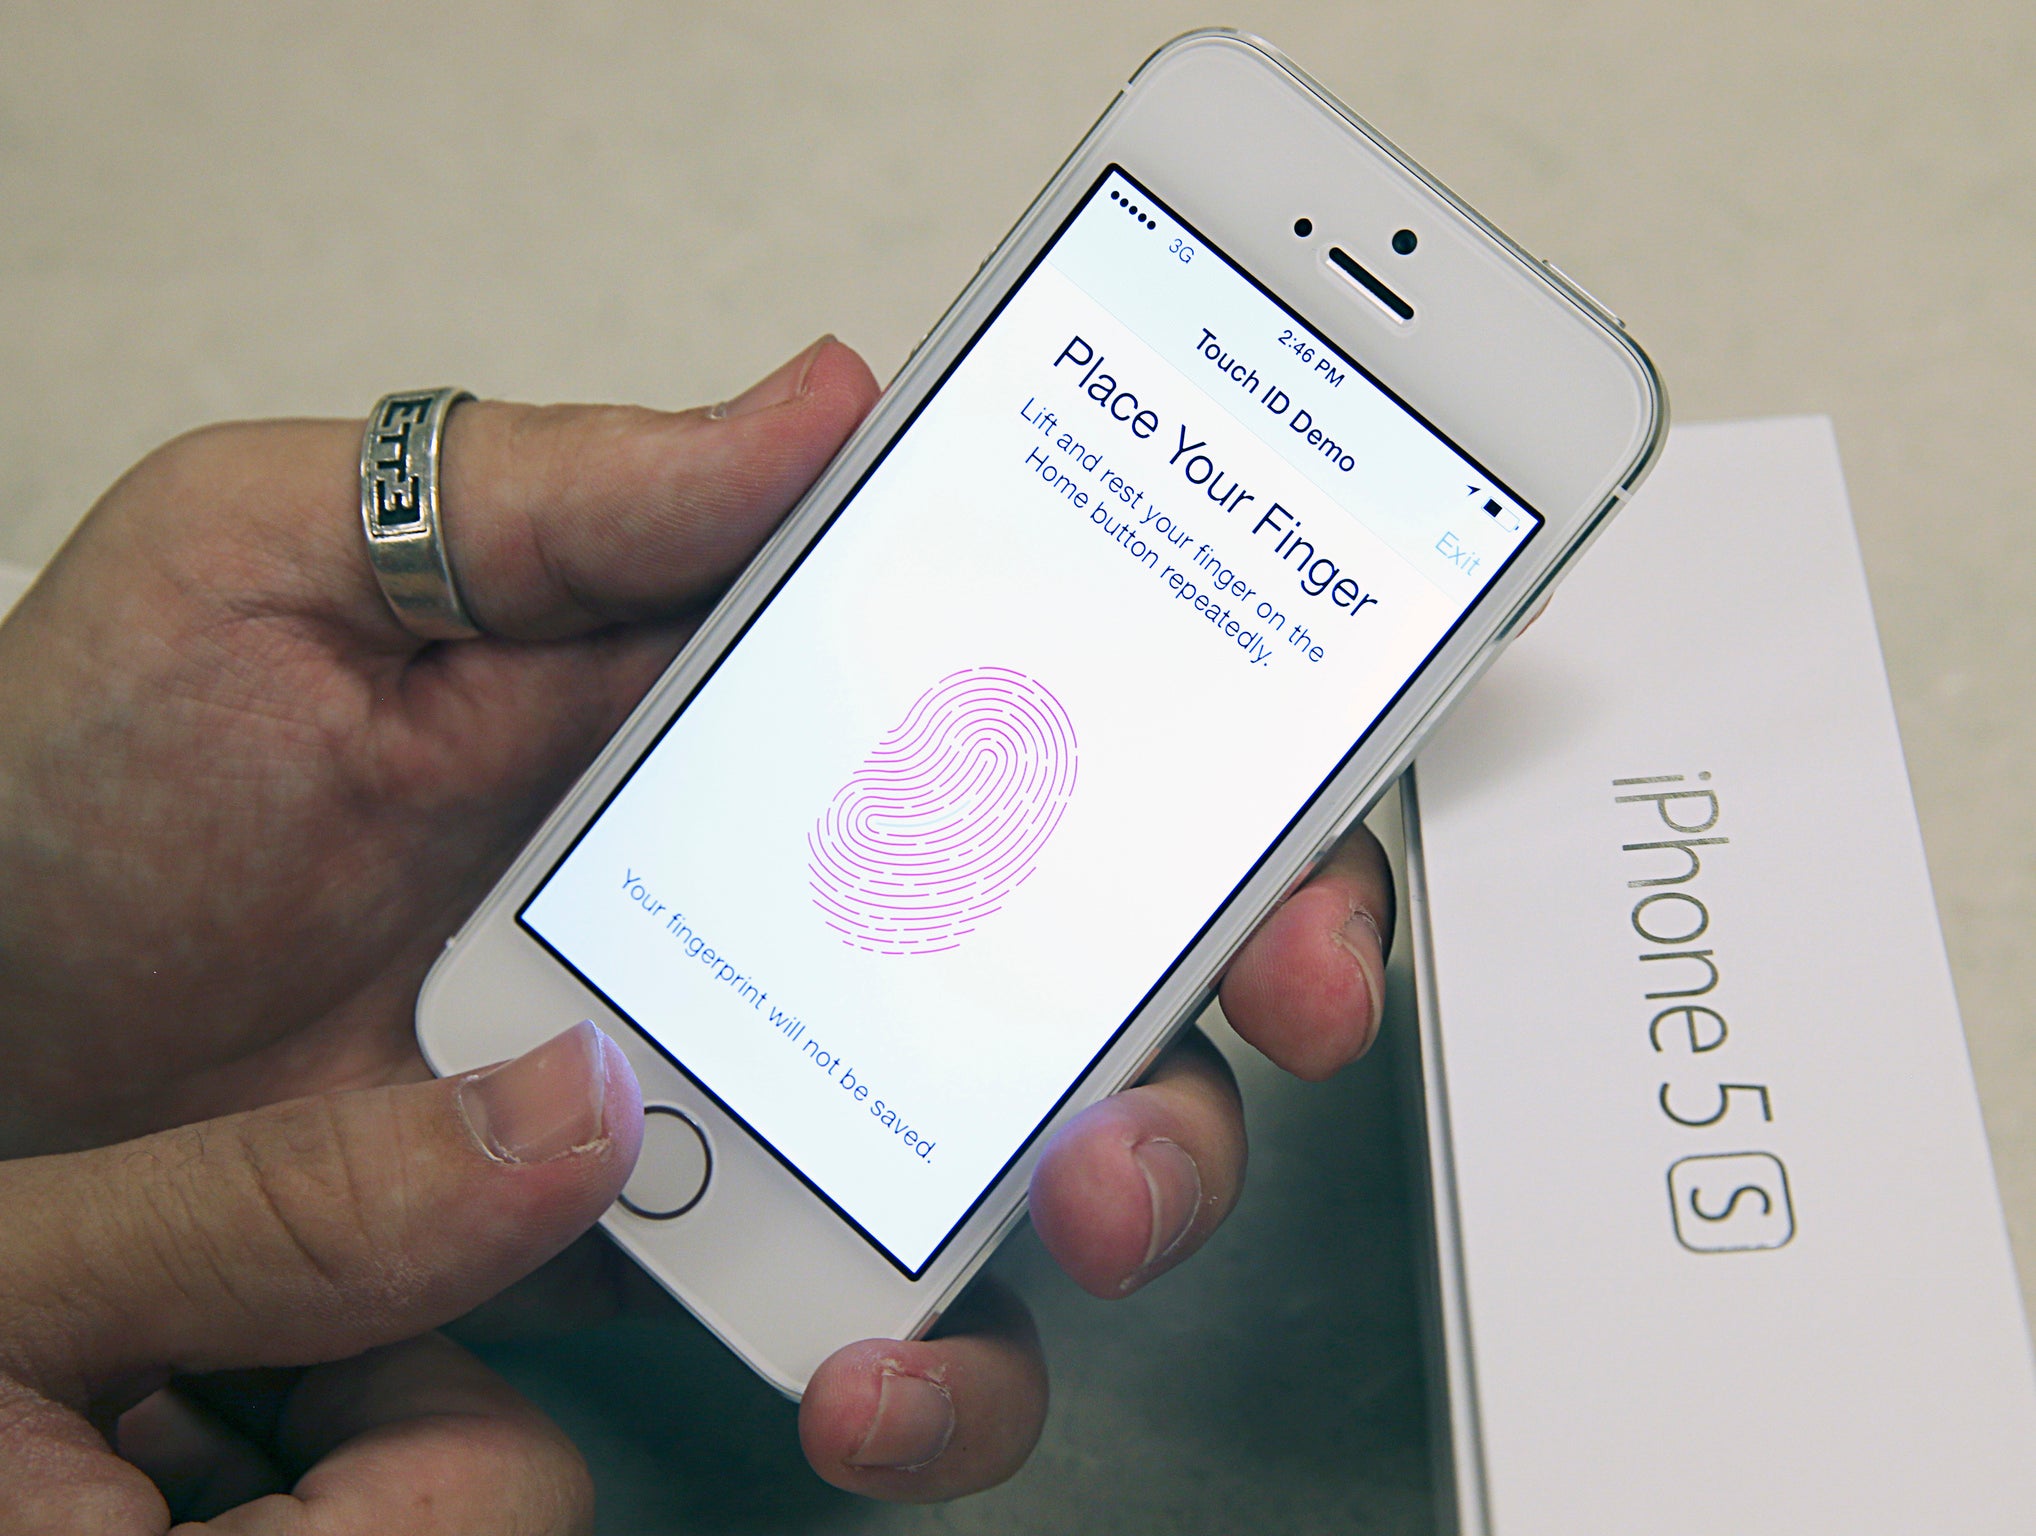 An employee tests the fingerprint scanner on the new Apple iPhone 5S at a Verizon store in Orem, Utah September 19, 2013.